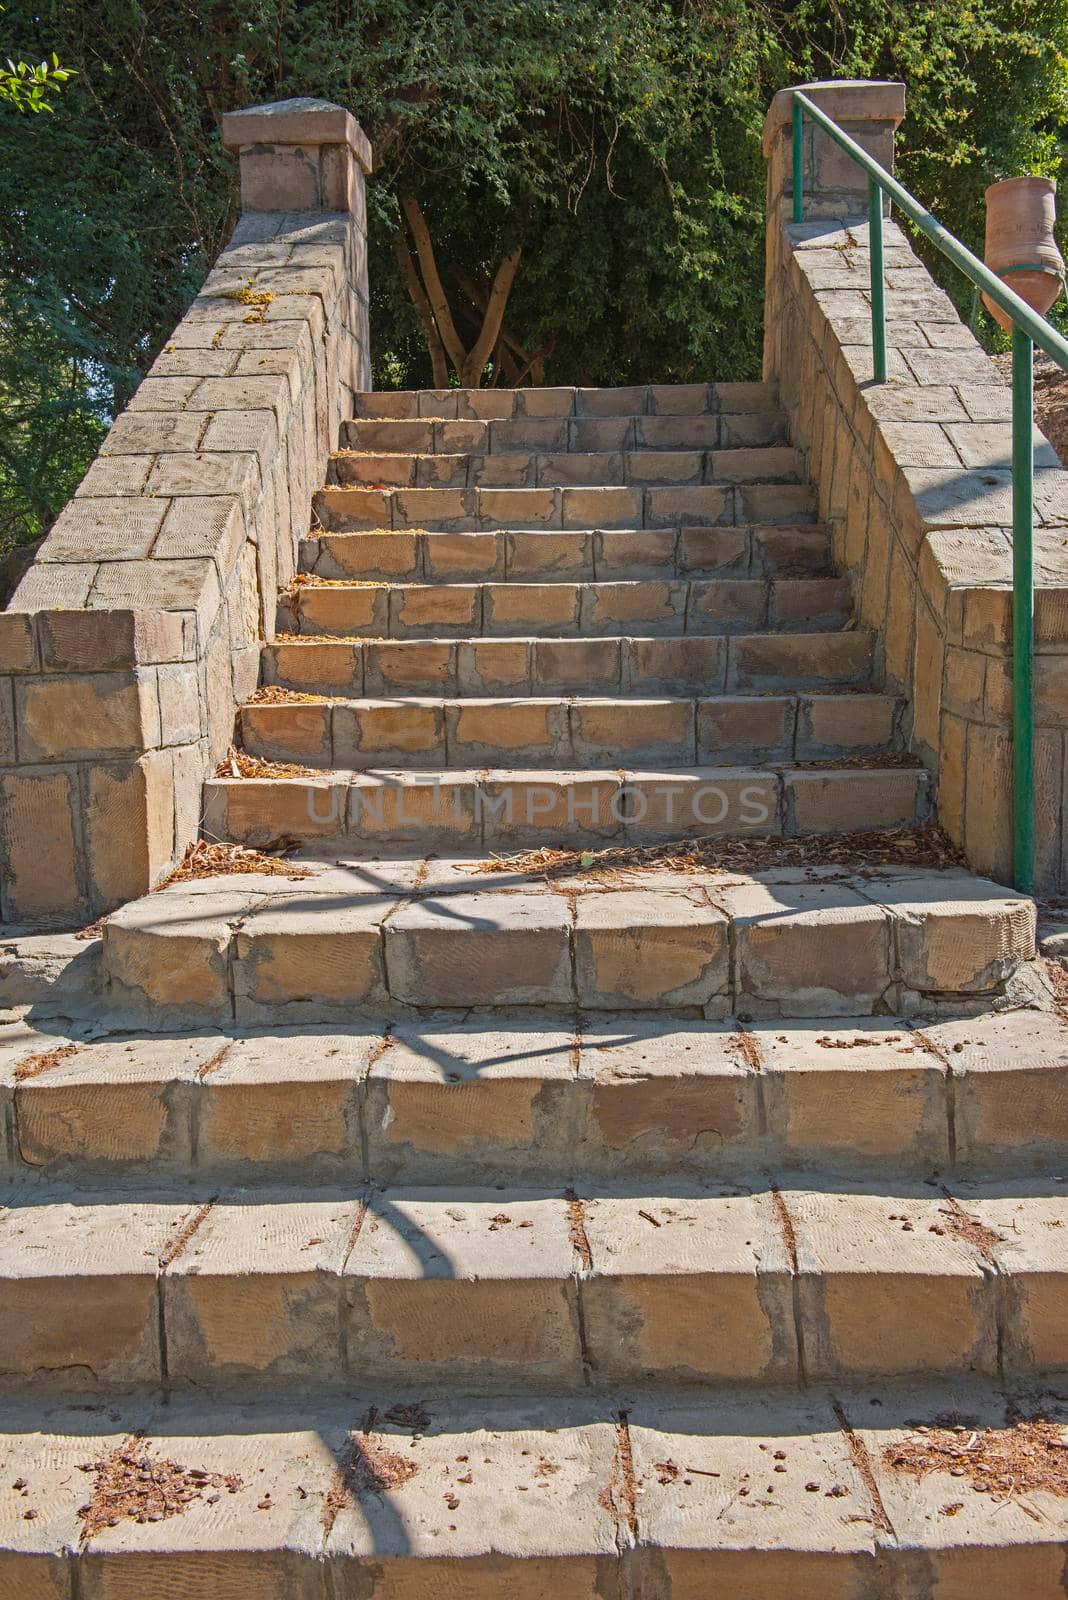 Closeup detail of stone paved steps on rural footpath walkway going upwards in formal garden grounds